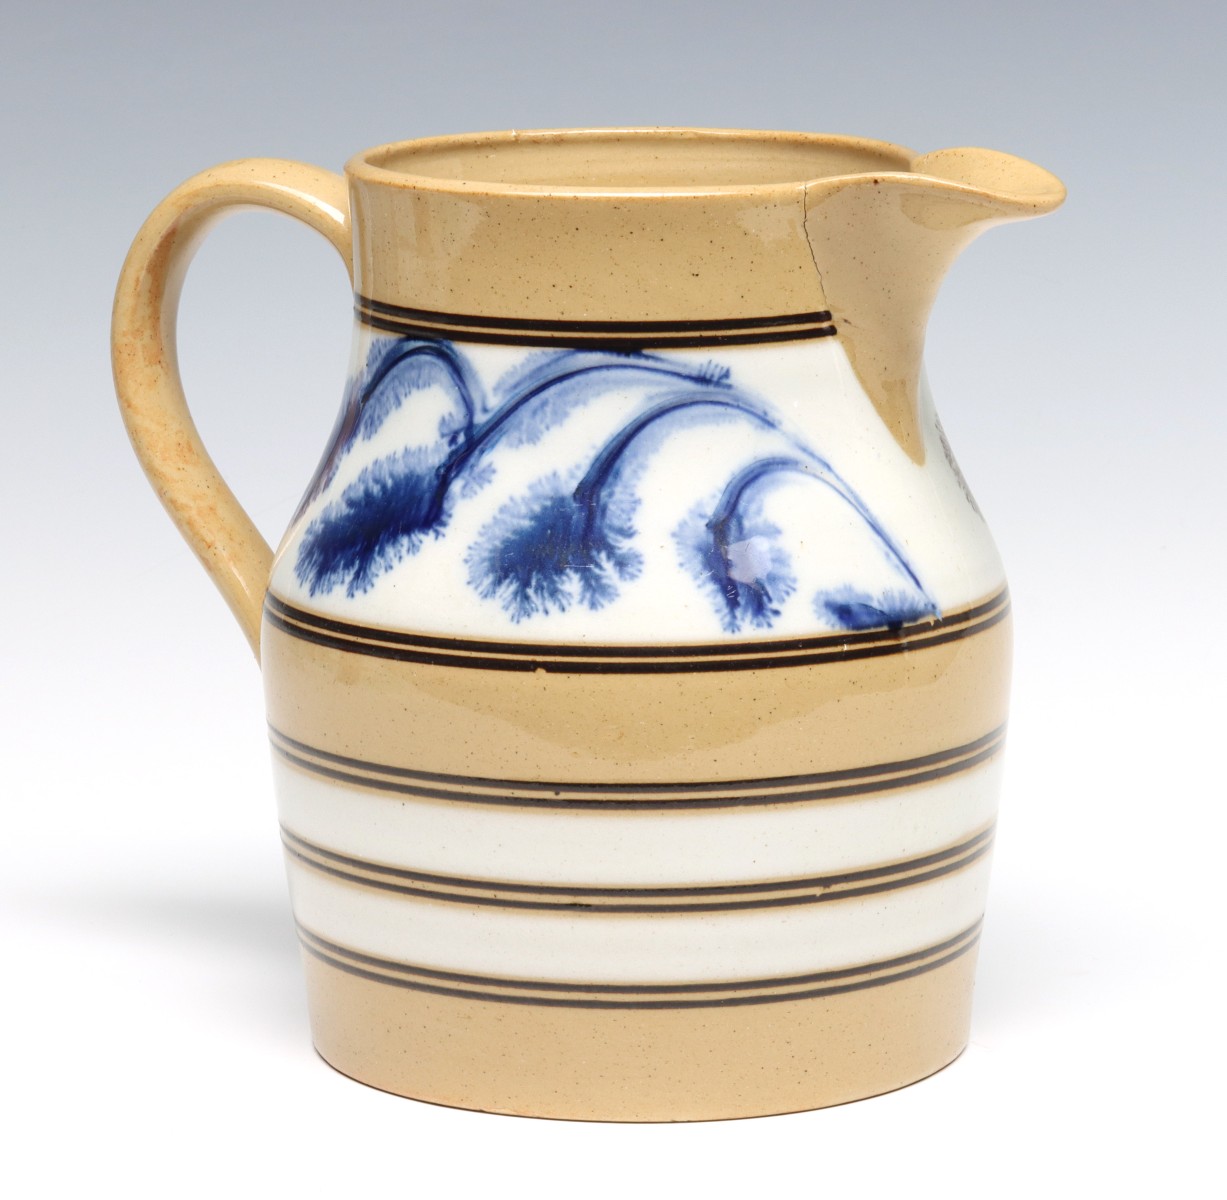 A YELLOW WARE PITCHER WITH SEAWEED DECORATION